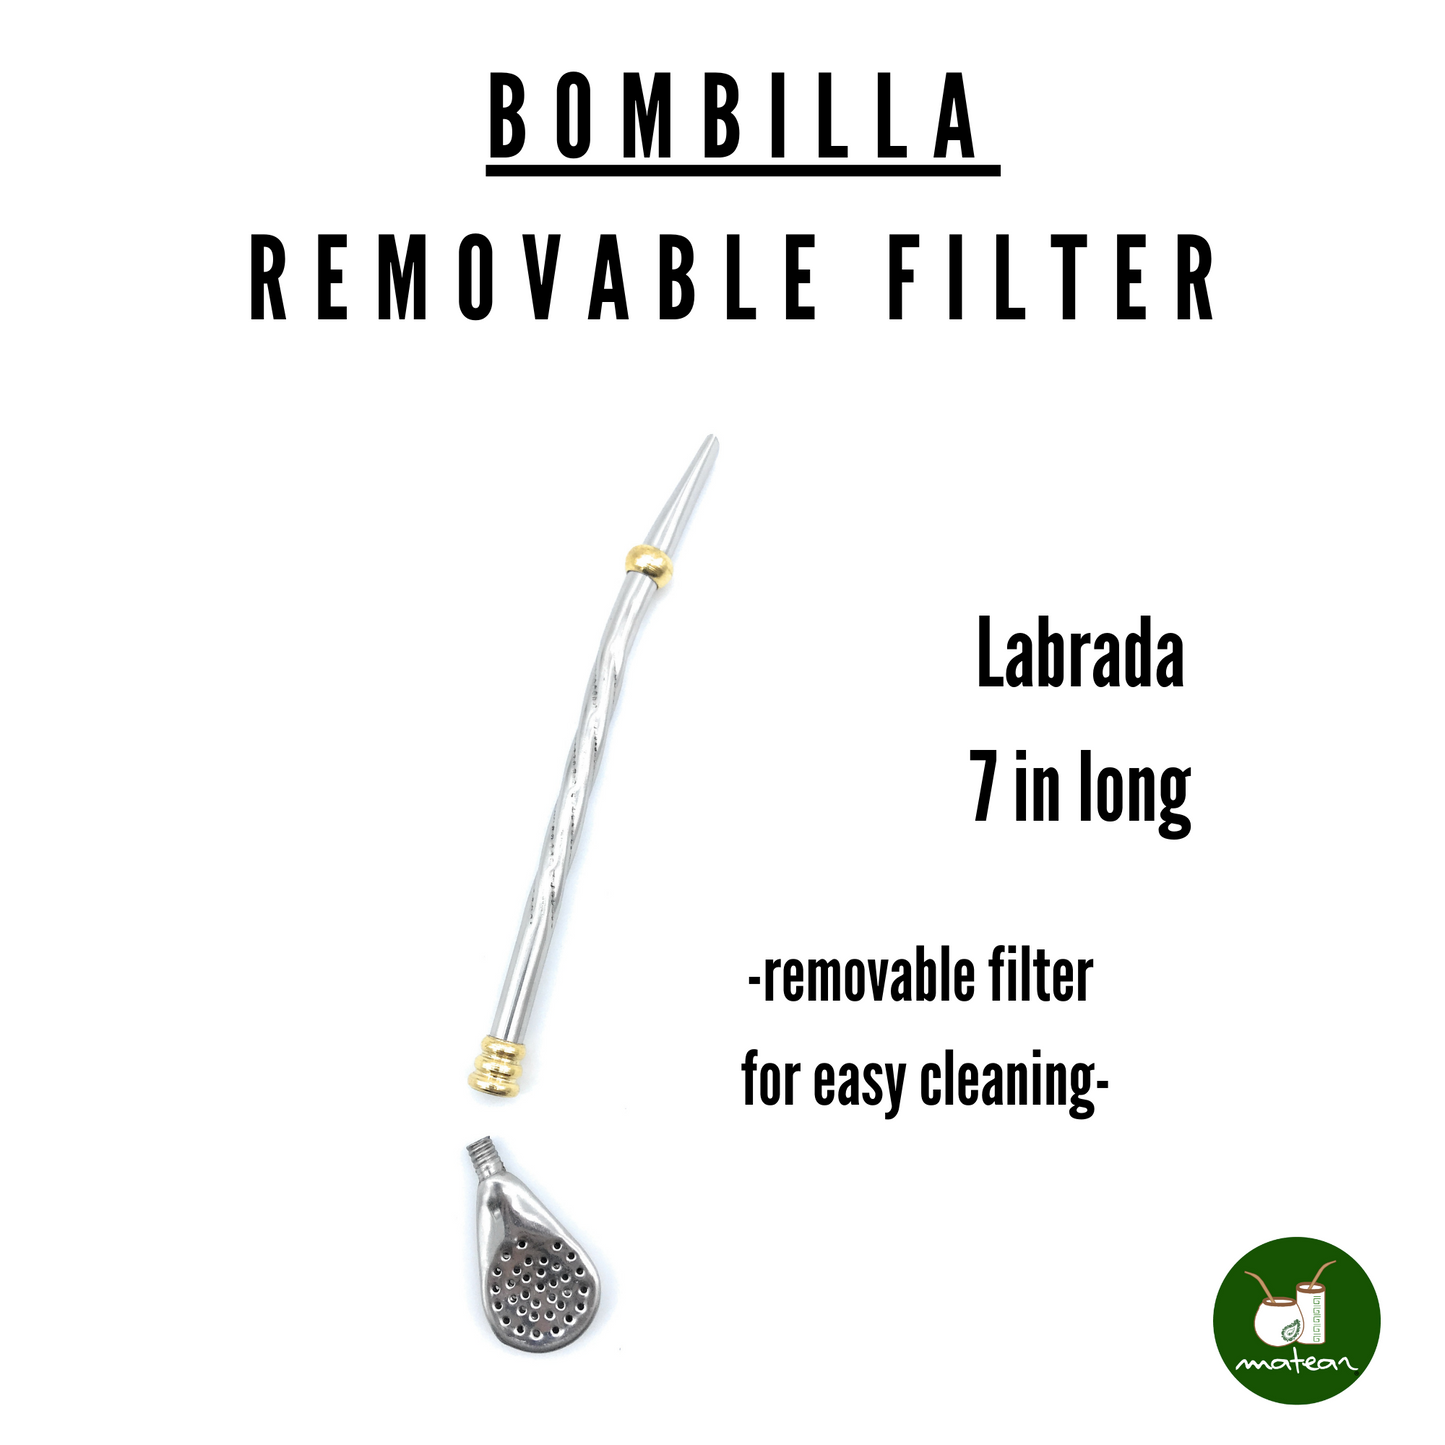 SET One bombilla & One cleaning brush PREMIUM  bombilla | Made in Argentina | Stainless steel & bronze  | Removable spoon style filter | 3 sizes/Style to choose from